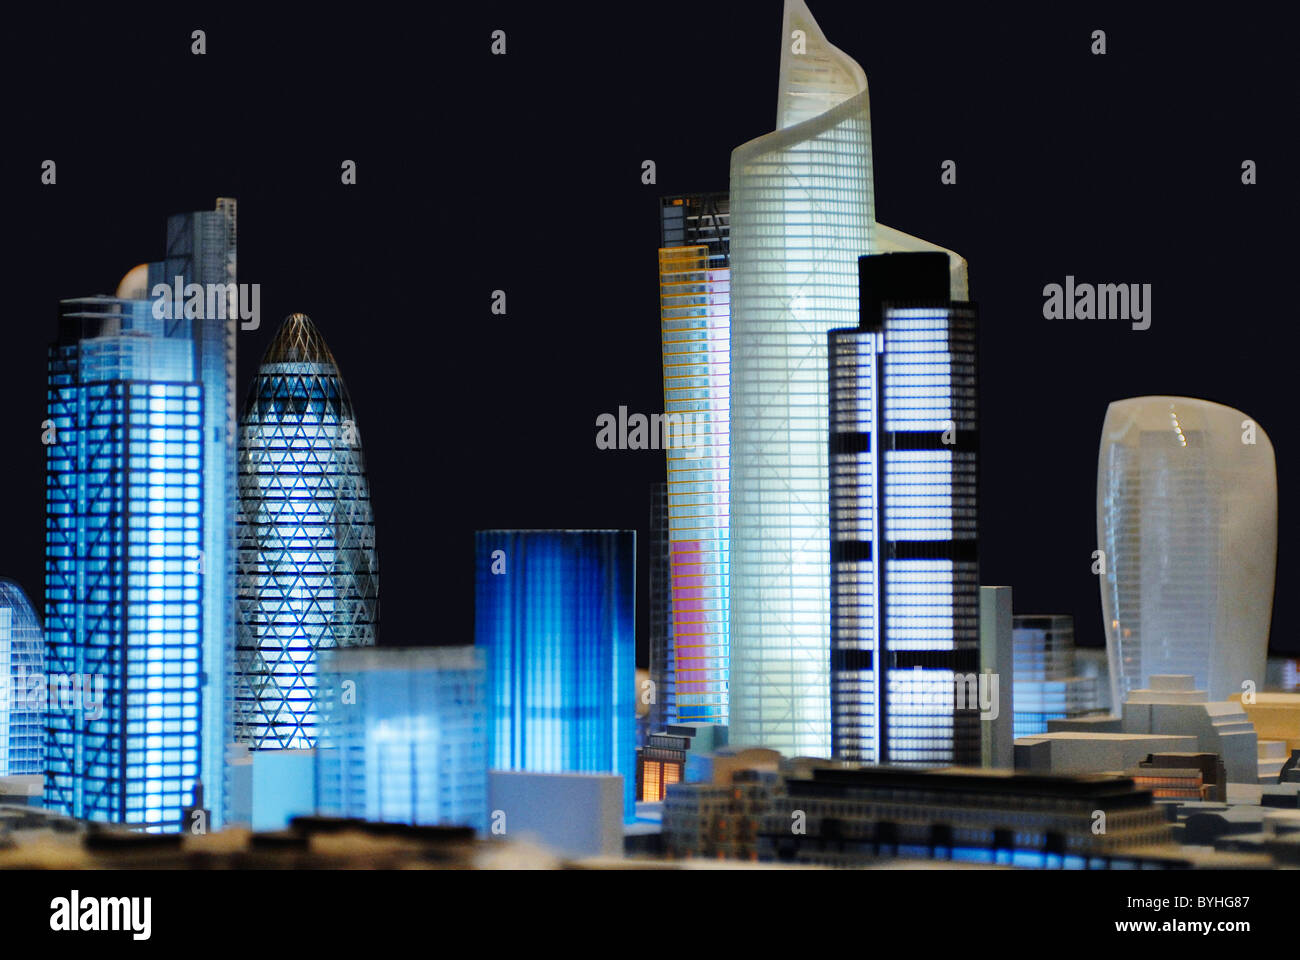 Model of London skyline with 30 St Mary Axe, Bishopsgate Tower, Tower 42  Heron Tower, Leadenhall Tower and 20 Fenchurch Street. Stock Photo